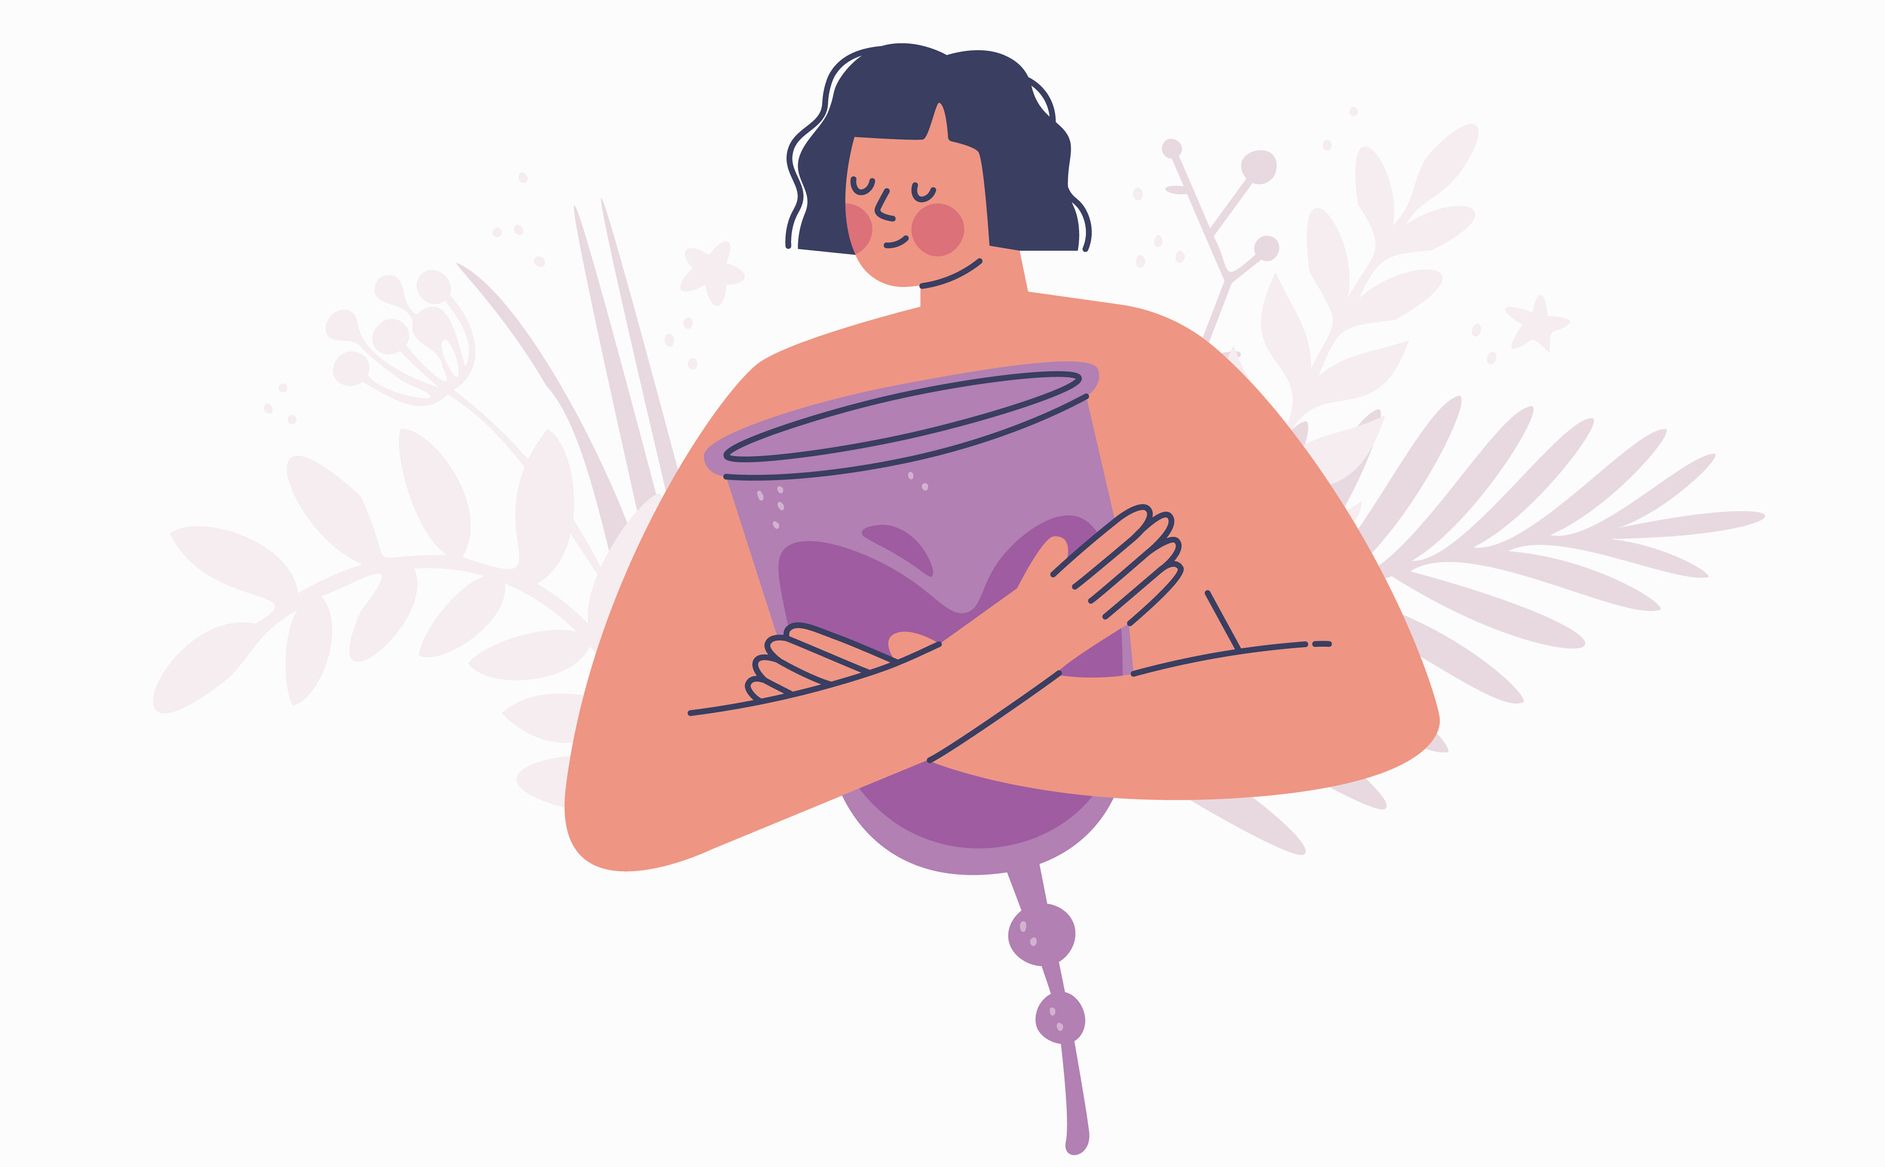 Illustration of a woman holding a menstrual cup